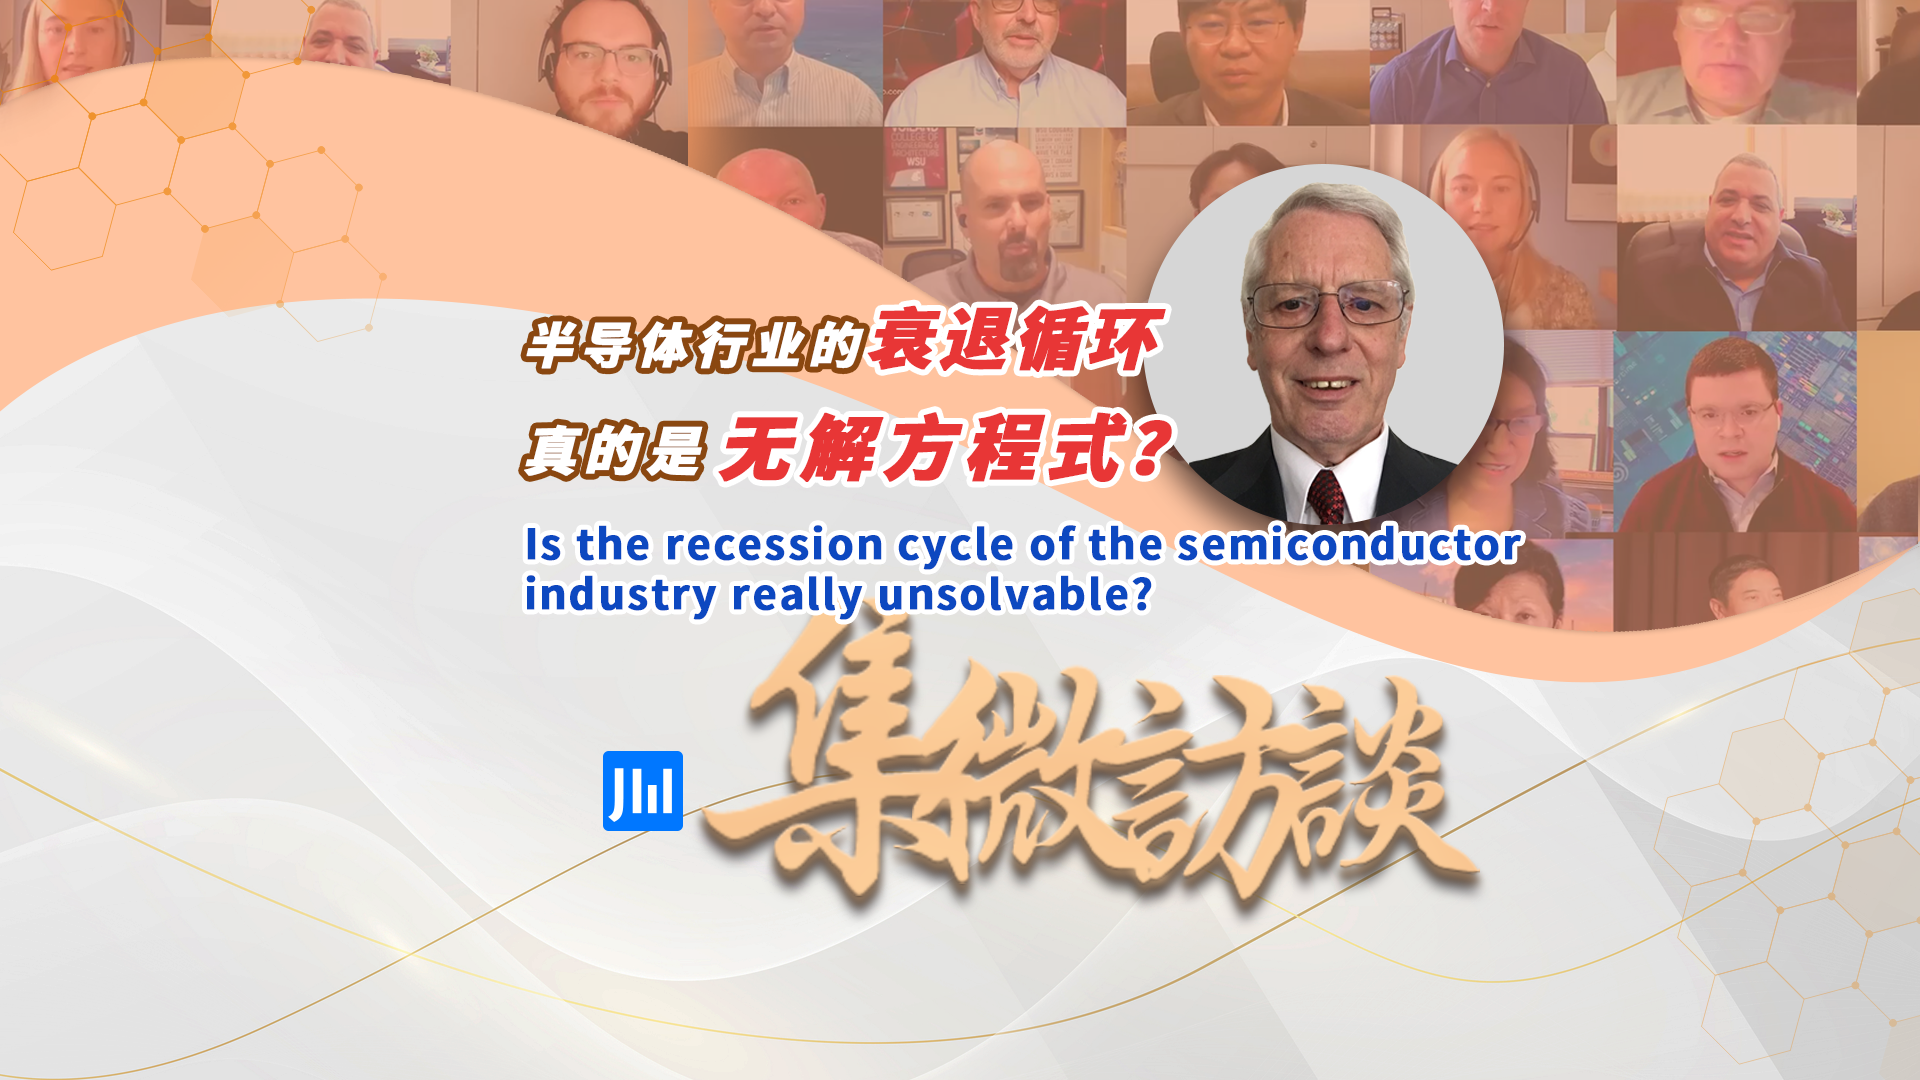 ijiweiTalk Ep 274: Is the recession cycle of the semiconductor industry really unsolvable?